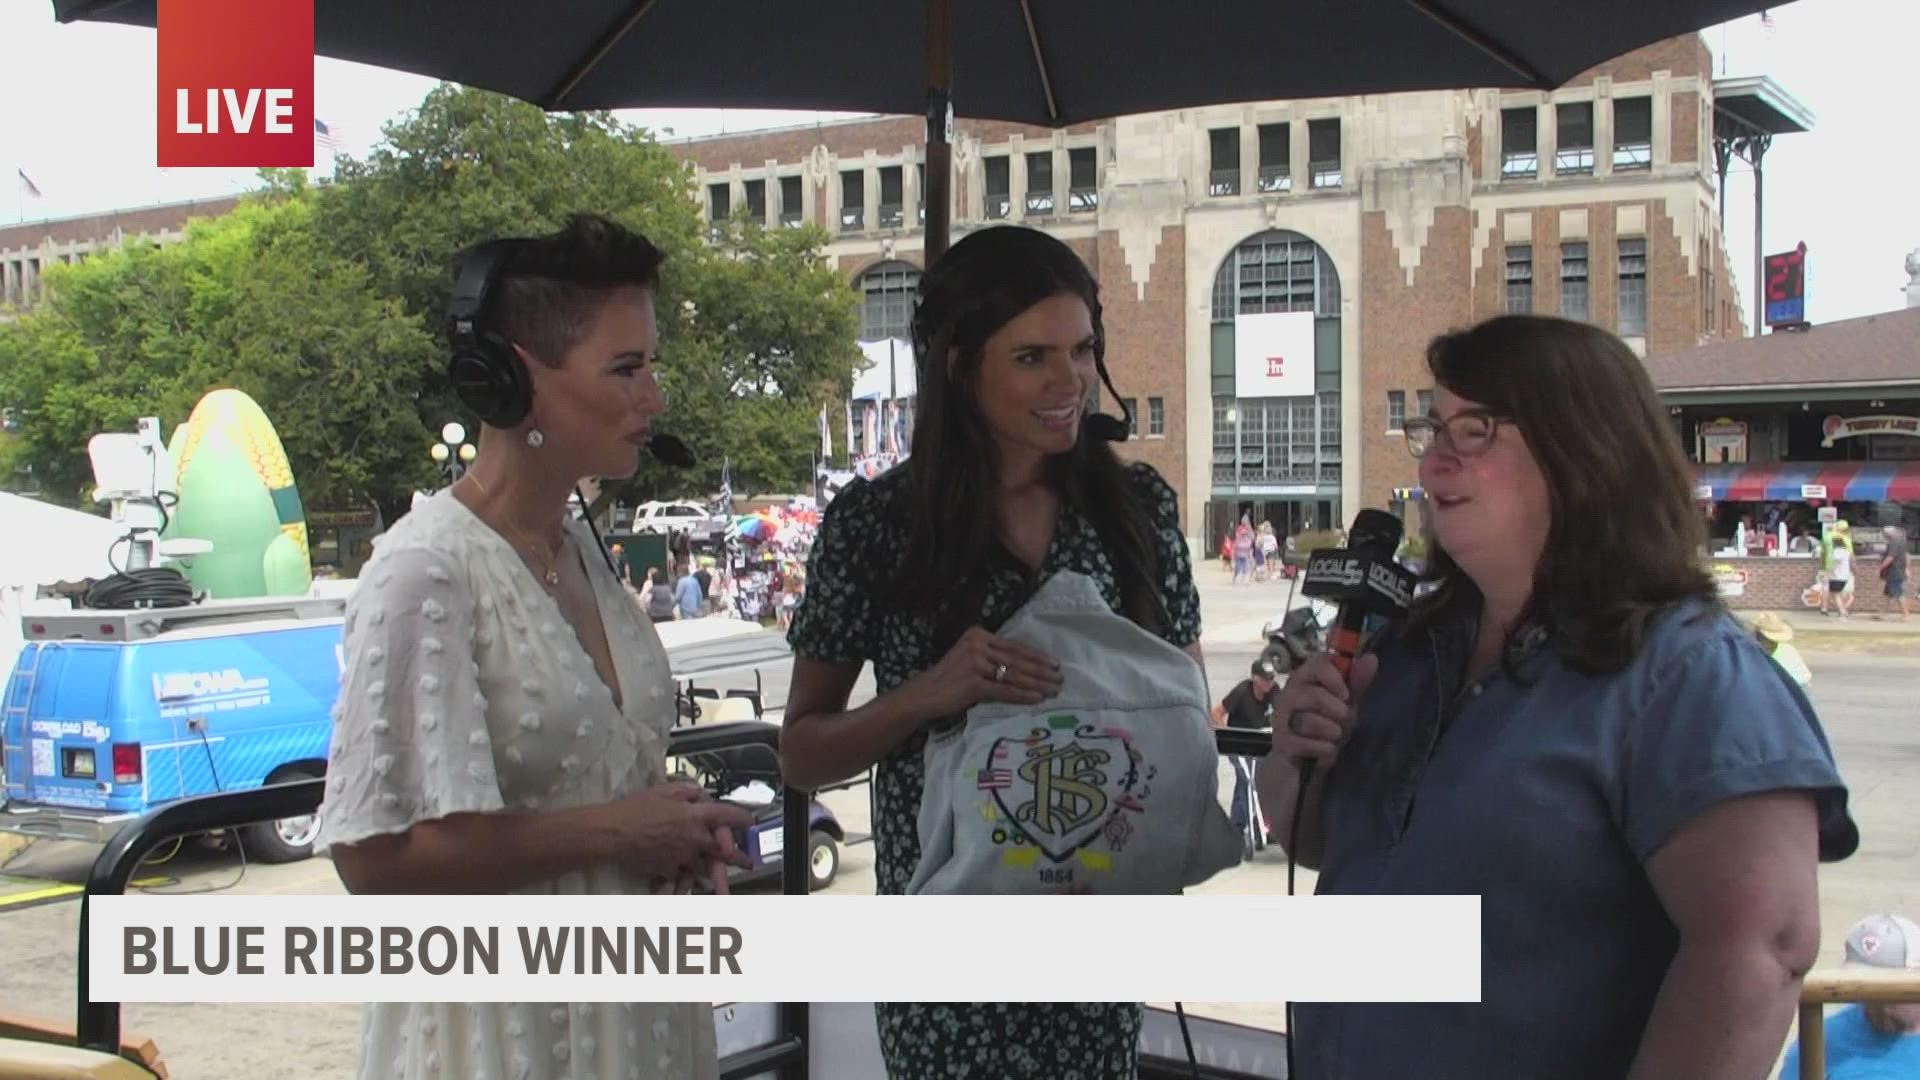 Awards aren't just for livestock, but for the fabric artists such as Joanne Roth of Des Moines.